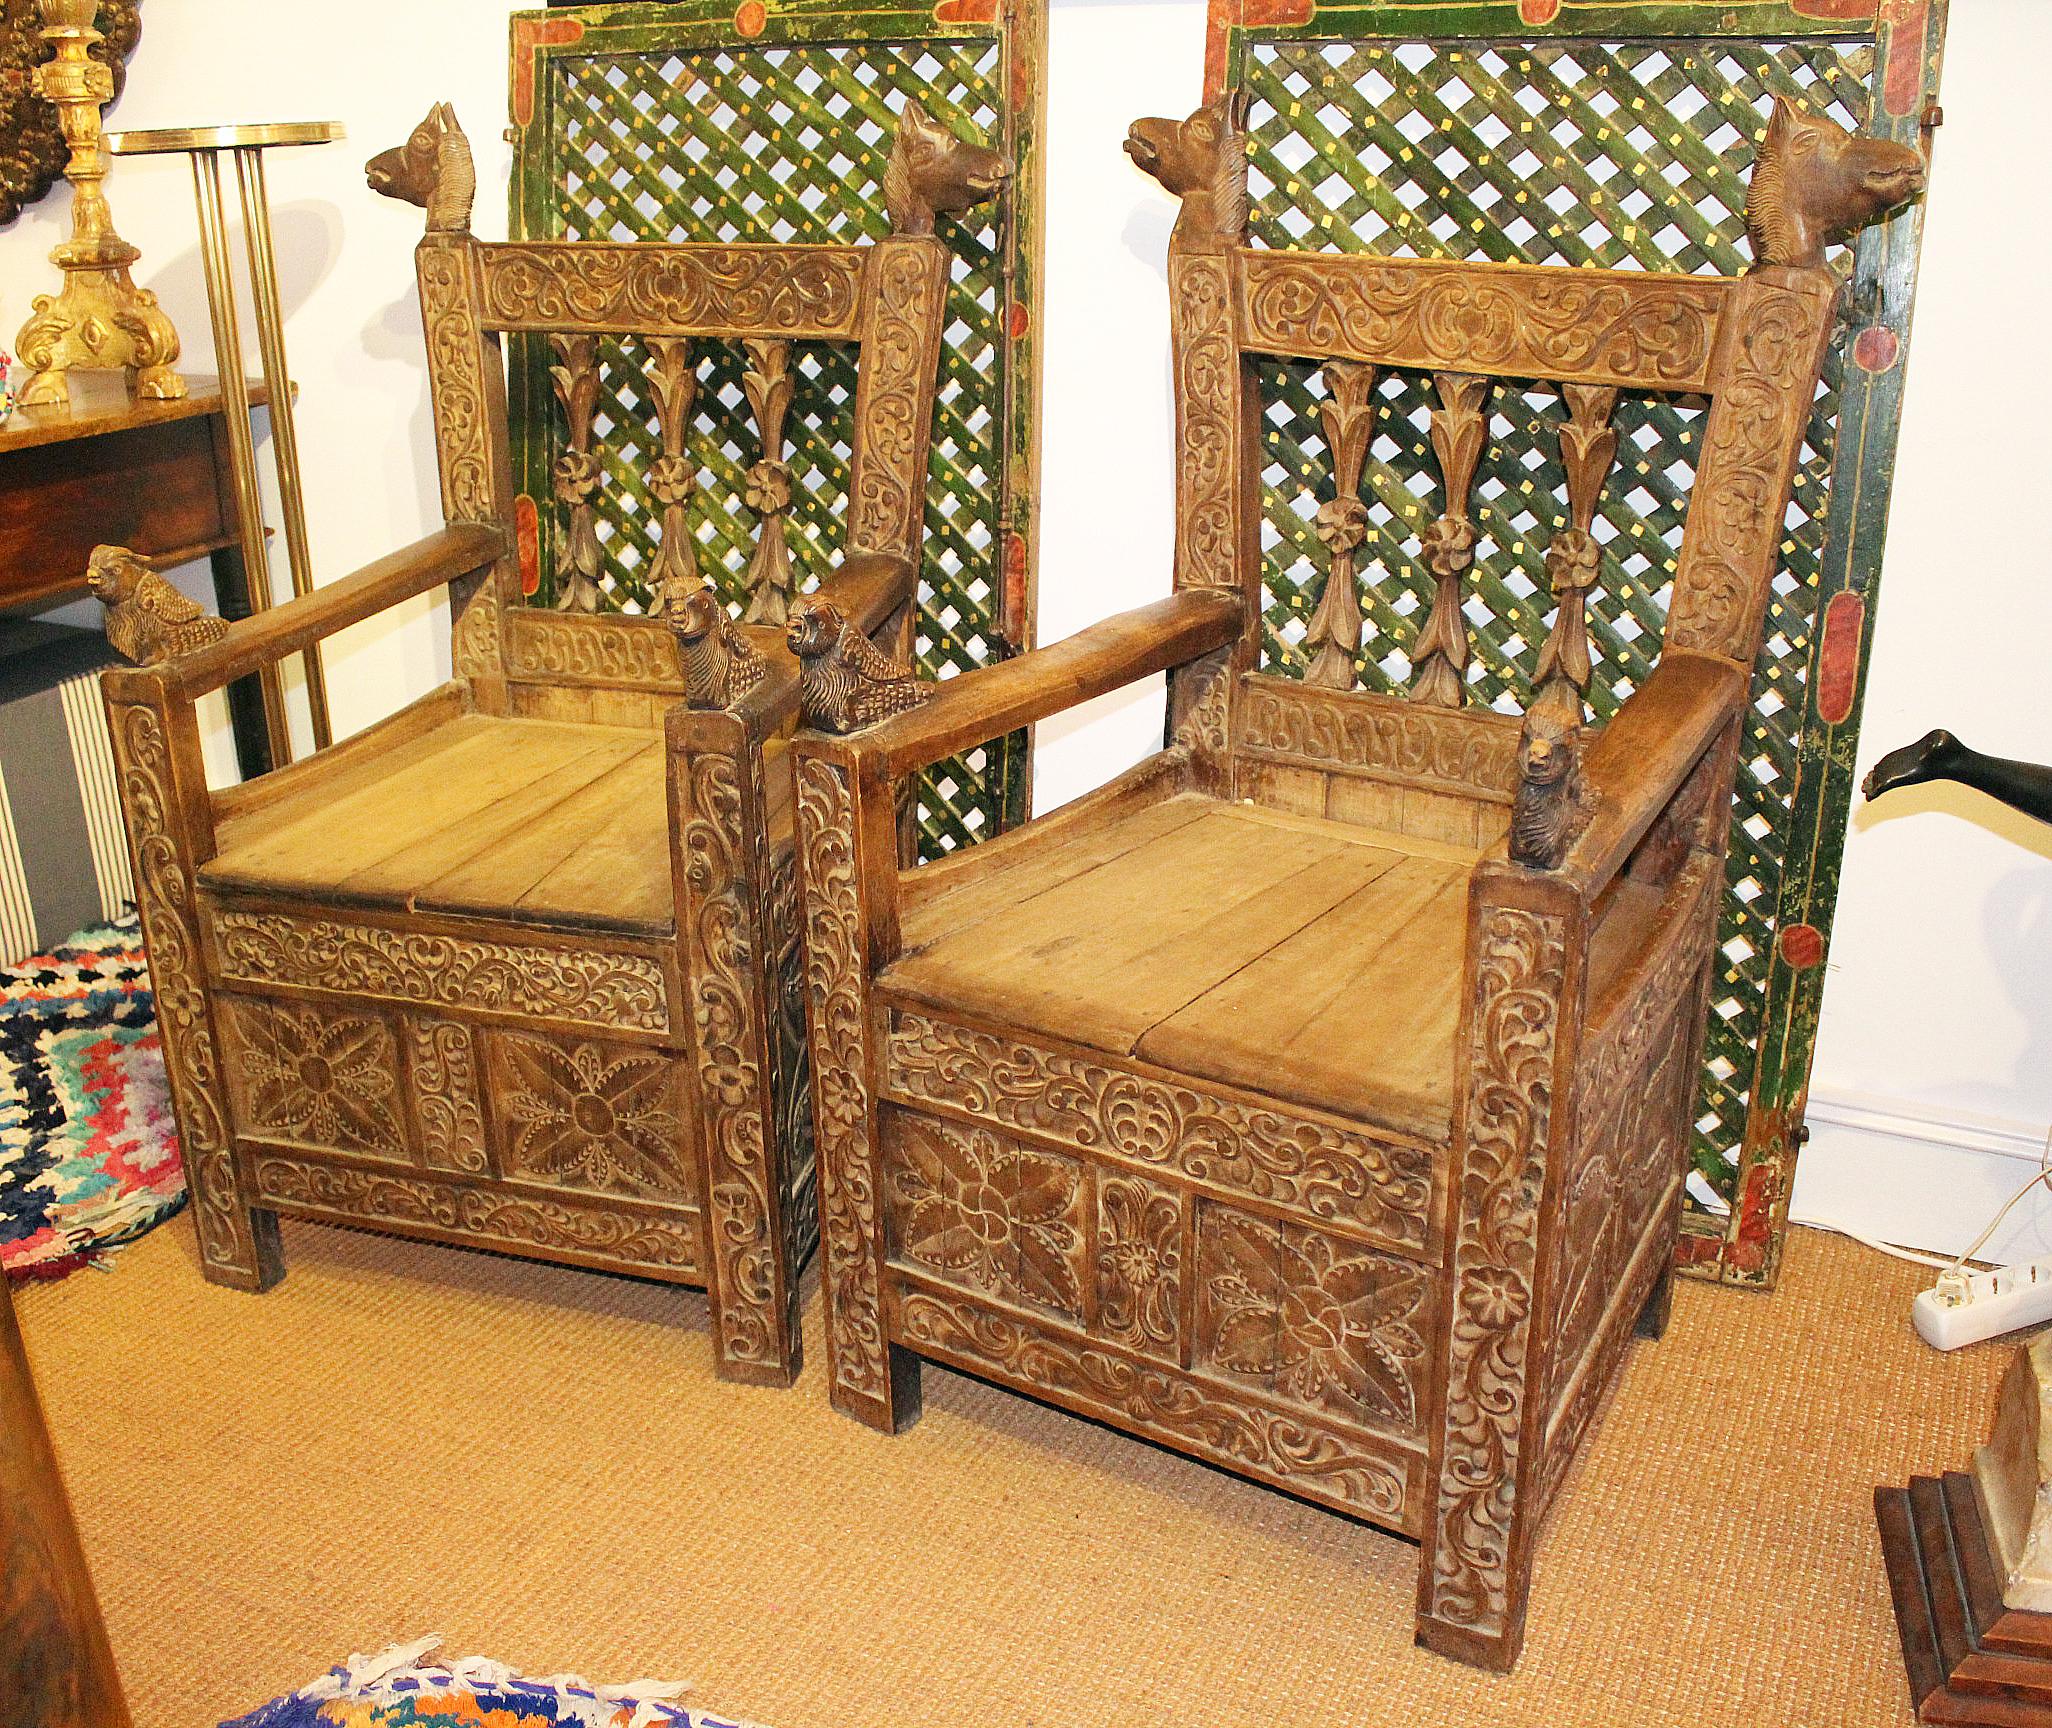 19th century pair of Bolivian hand carved wooden armchairs, decorated with geometric motifs and animals on arm and backrest.